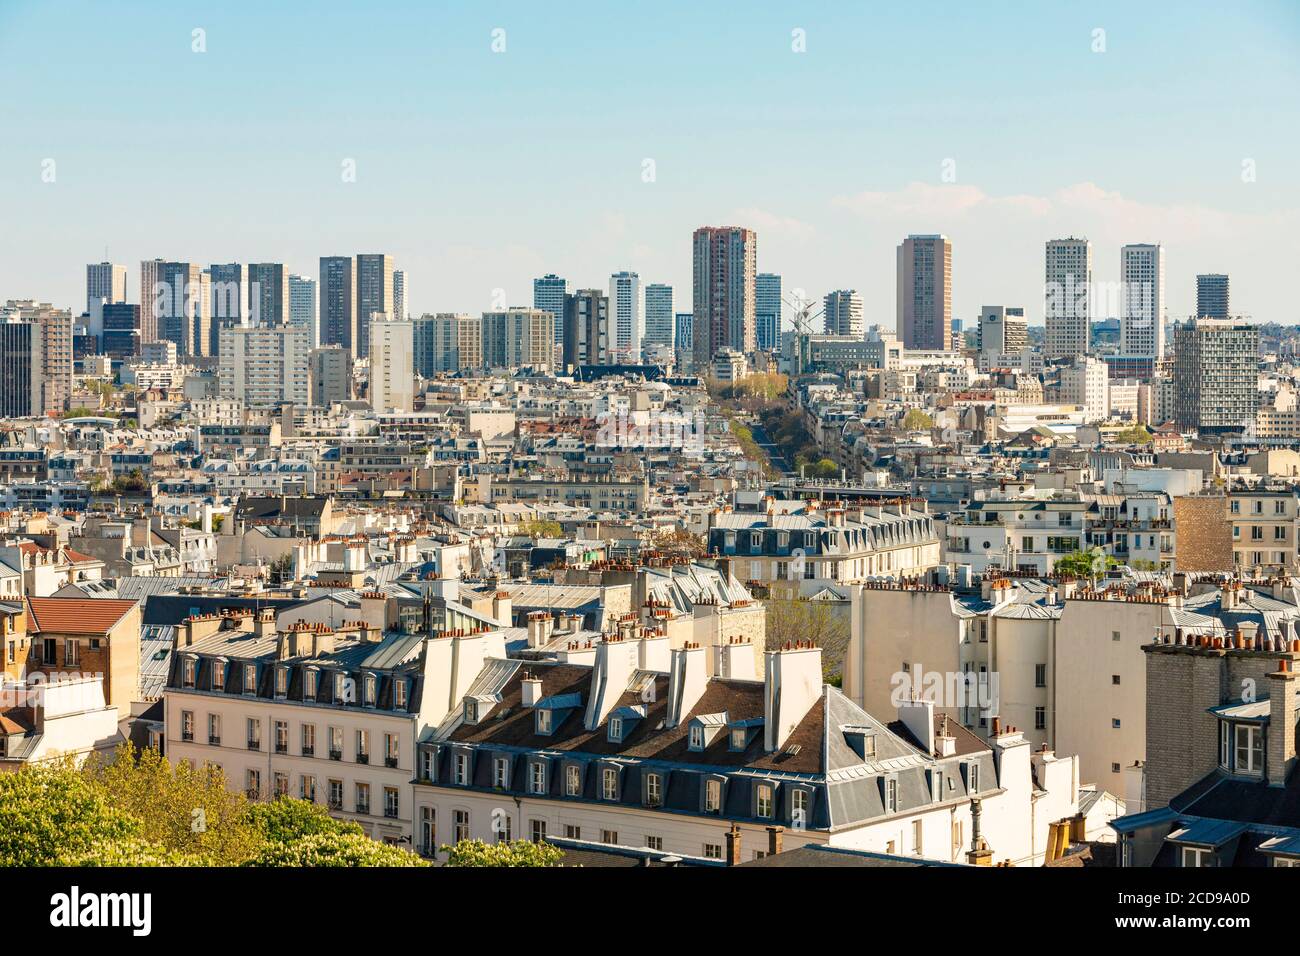 France, Paris, the roofs of Paris the district of the towers of the place d'Italie Stock Photo